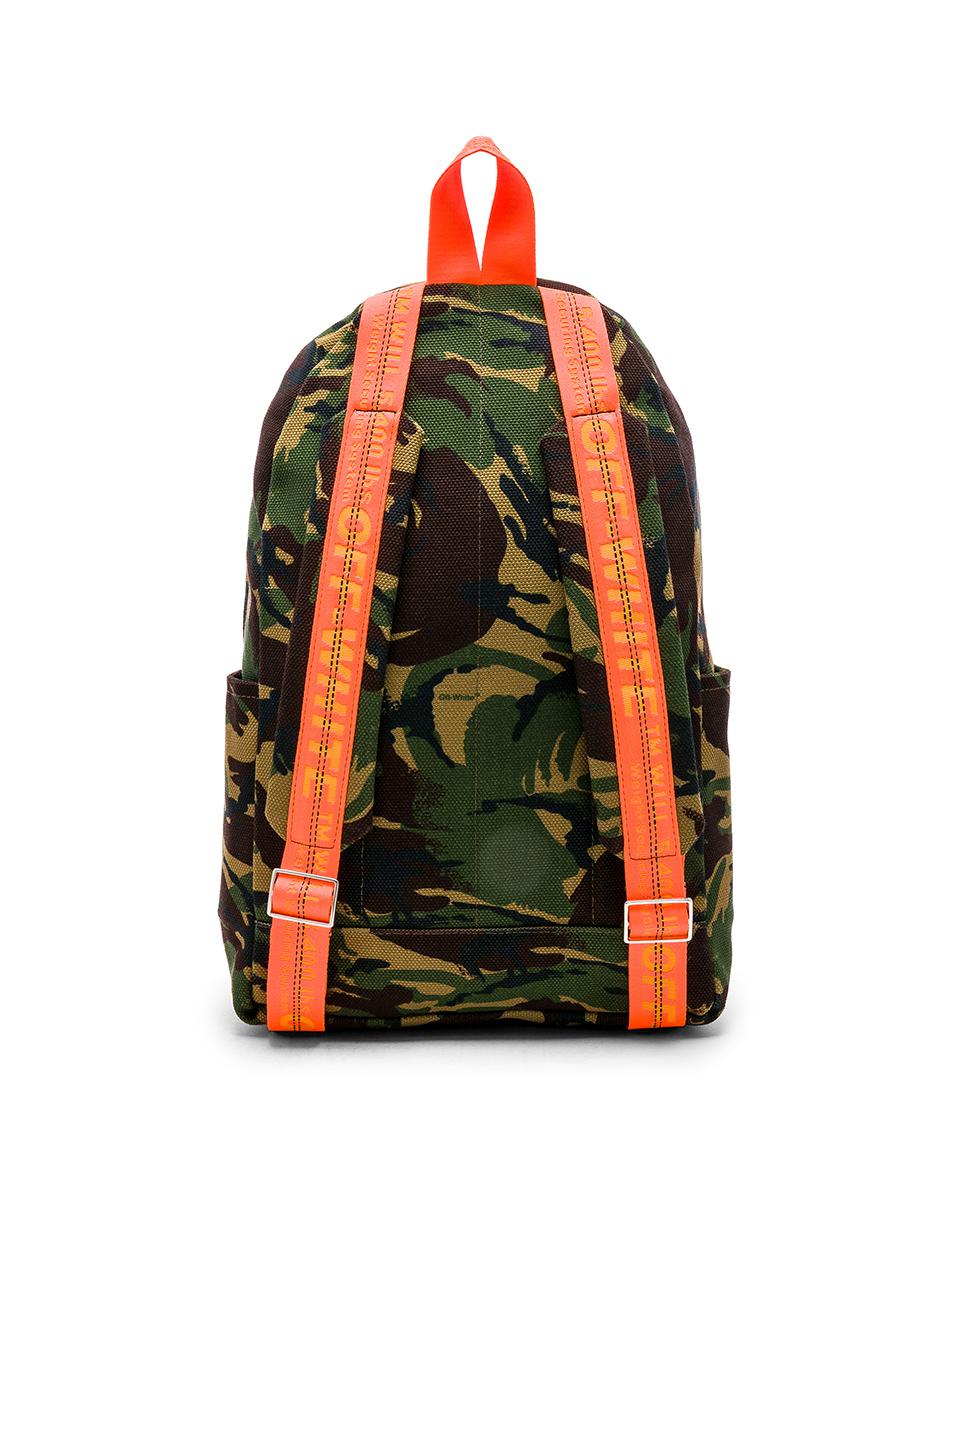 Lyst - Off-White c/o Virgil Abloh Arrows Backpack in Green